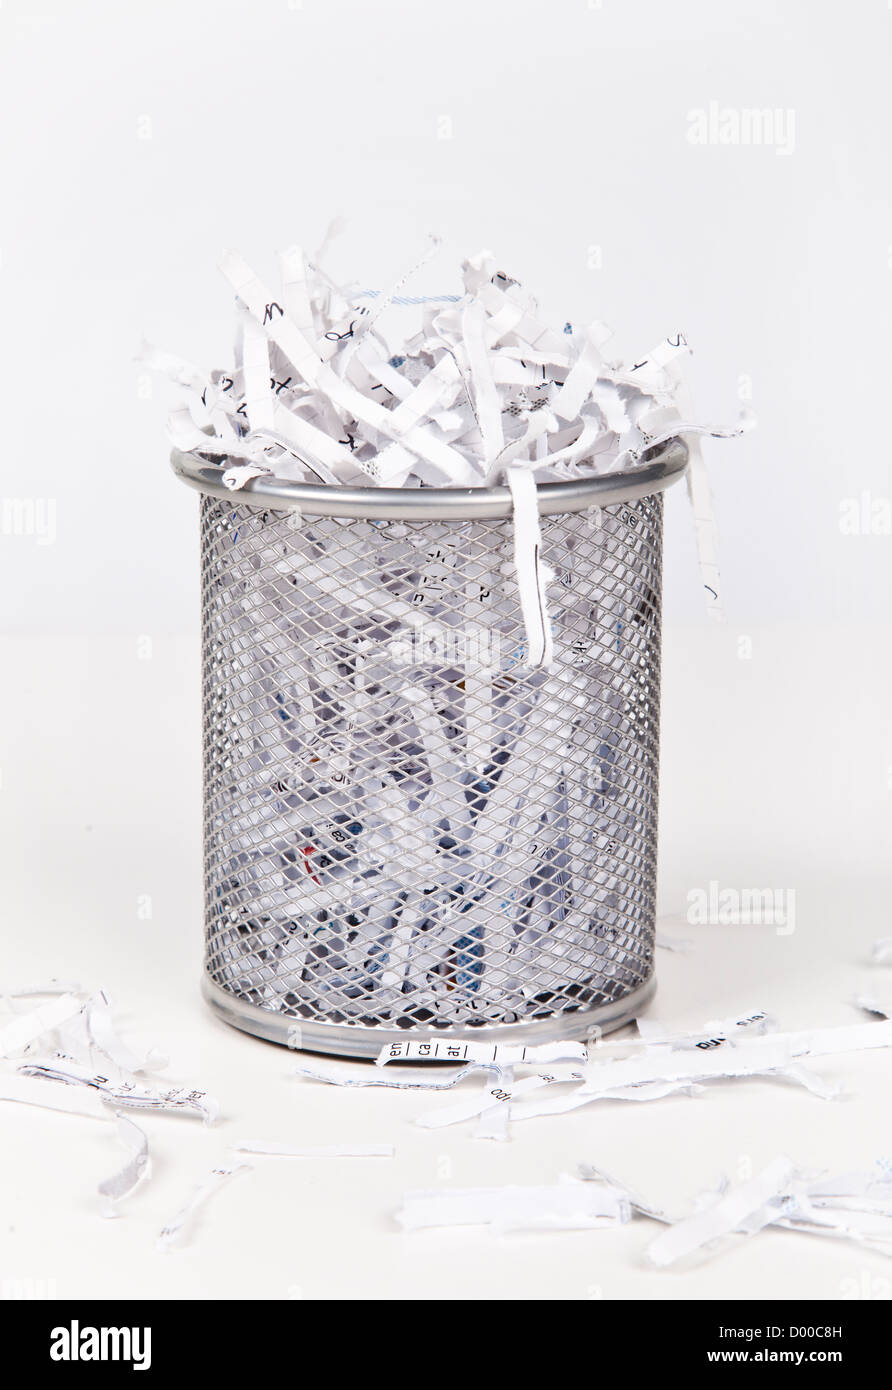 Wastepaper basket with papers lying around over white background Stock Photo